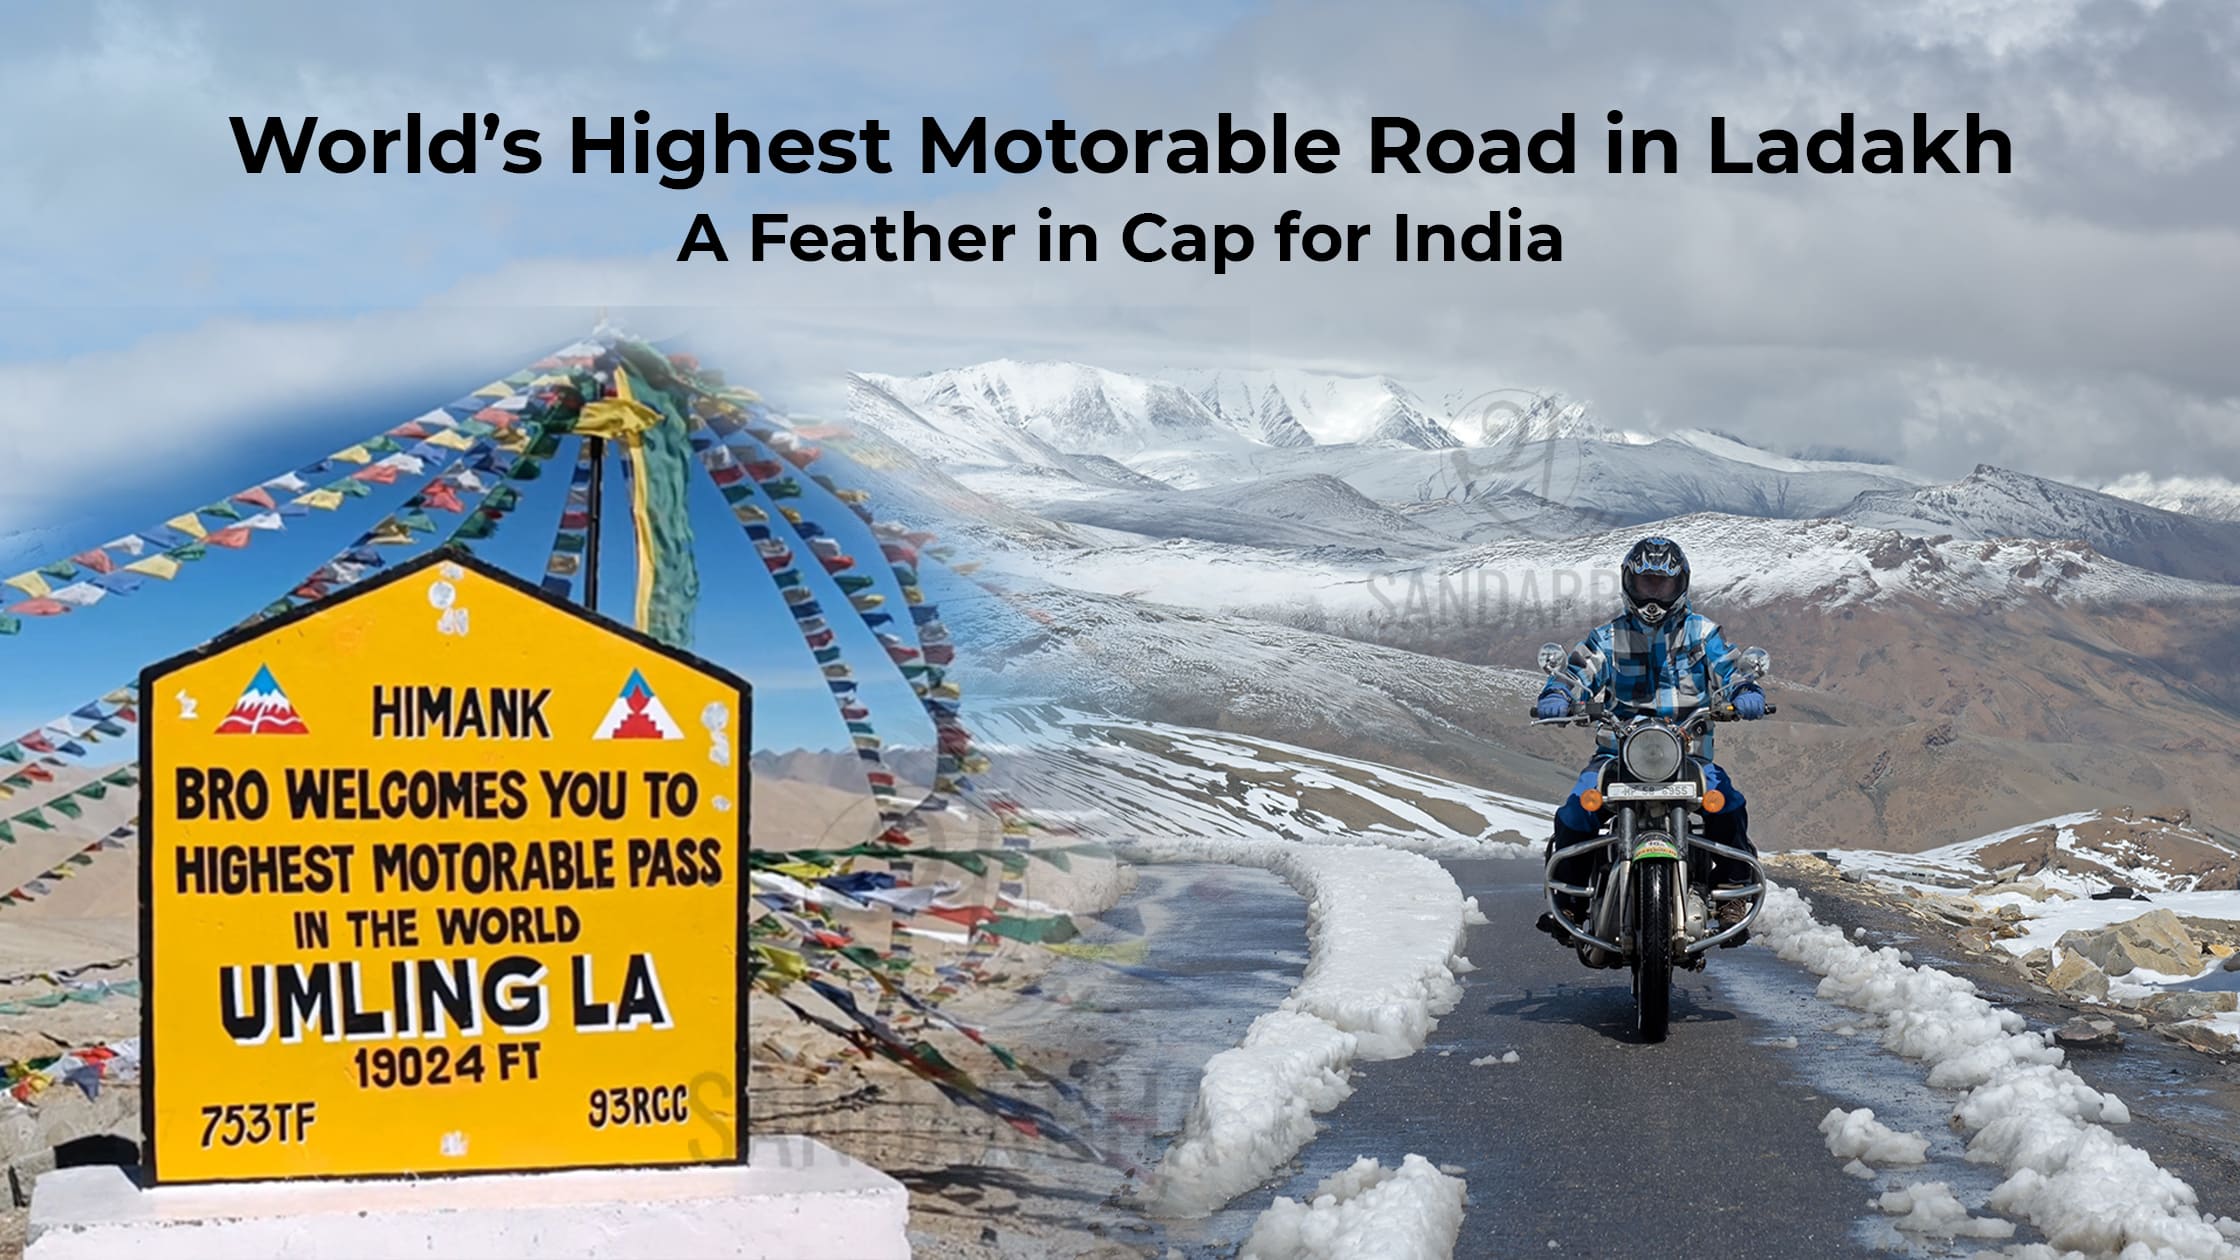 World’s Highest Motorable Road in Ladakh- A Feather in Cap for India